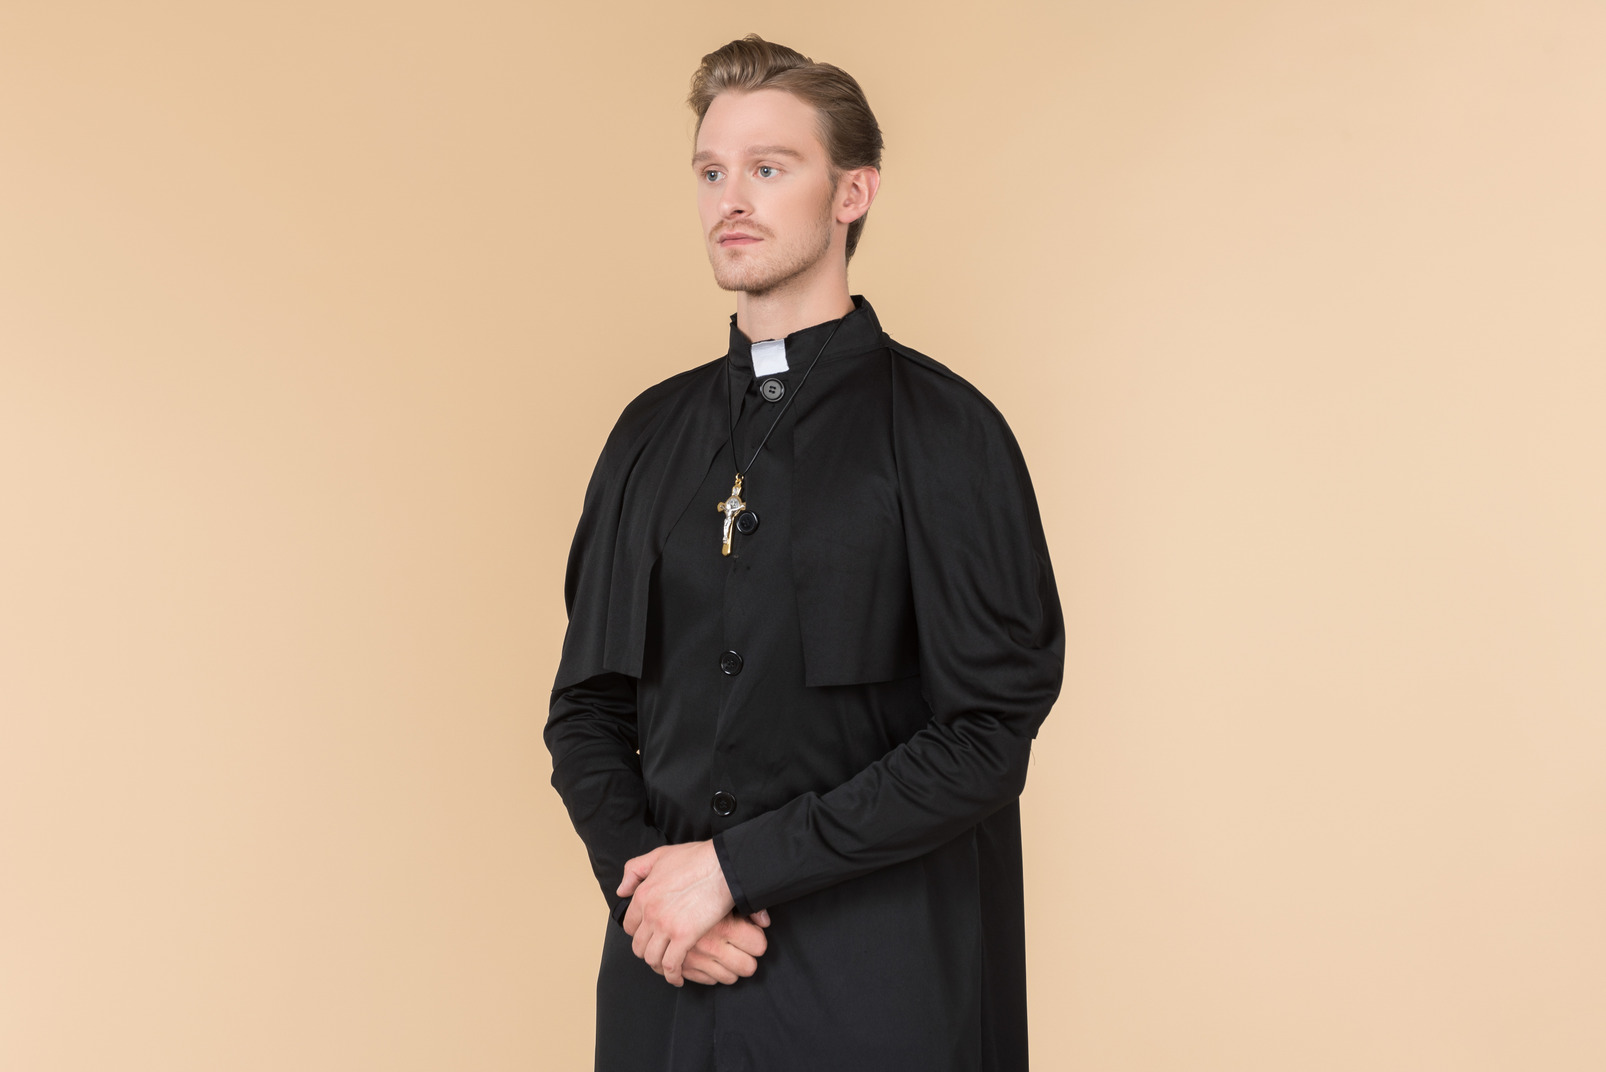 Catholic priest in cassock standing in profile